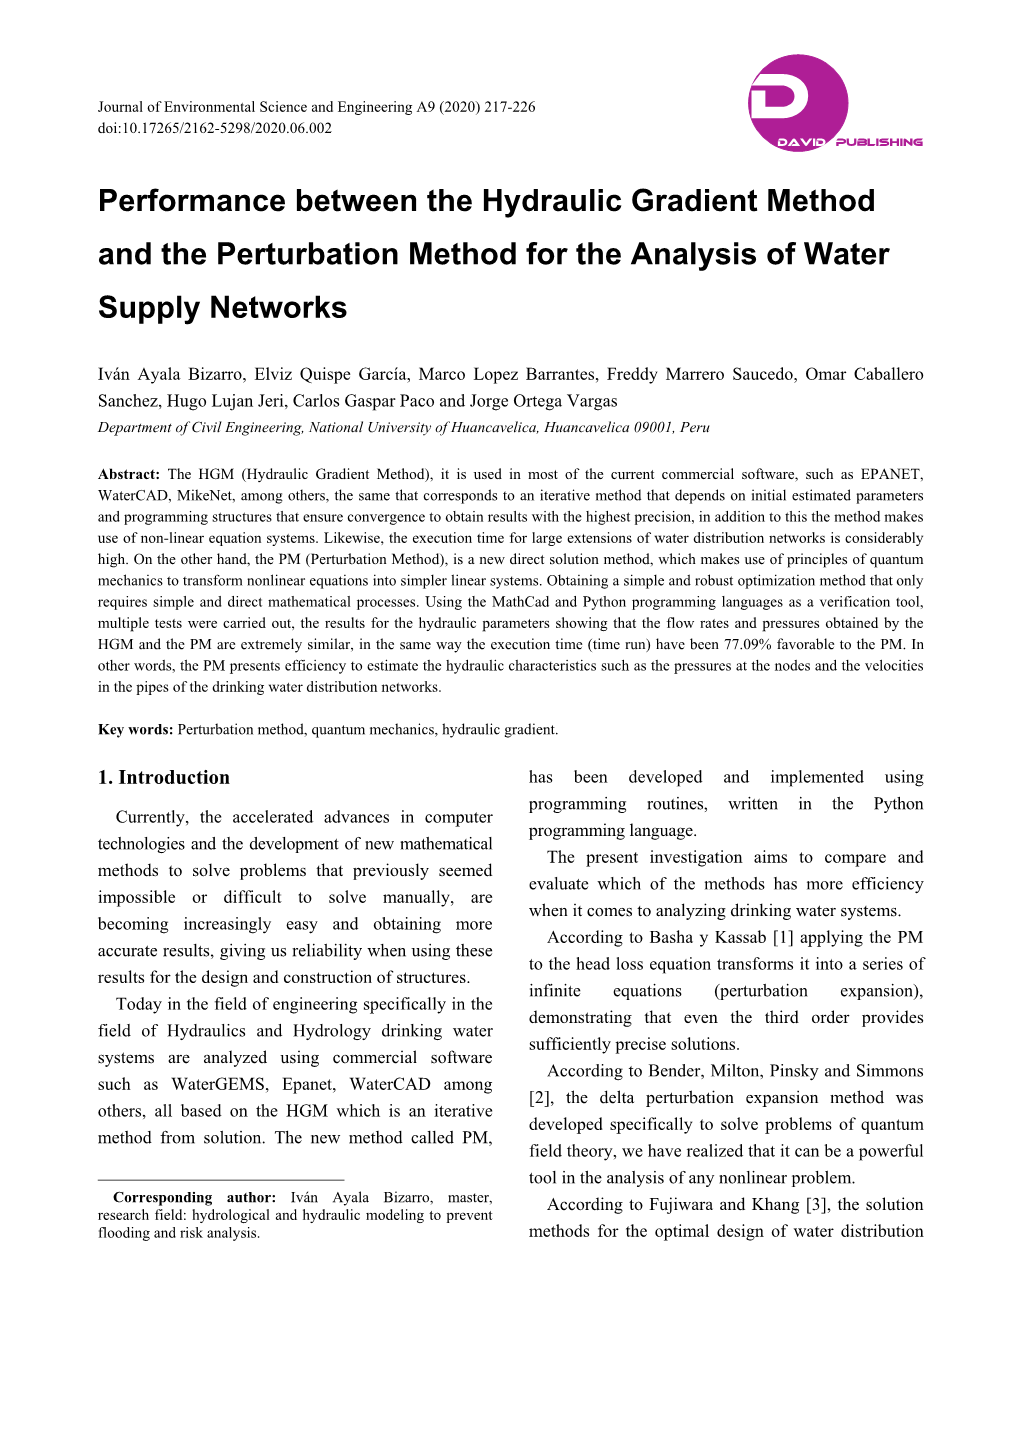 Performance Between the Hydraulic Gradient Method and the Perturbation Method for the Analysis of Water Supply Networks